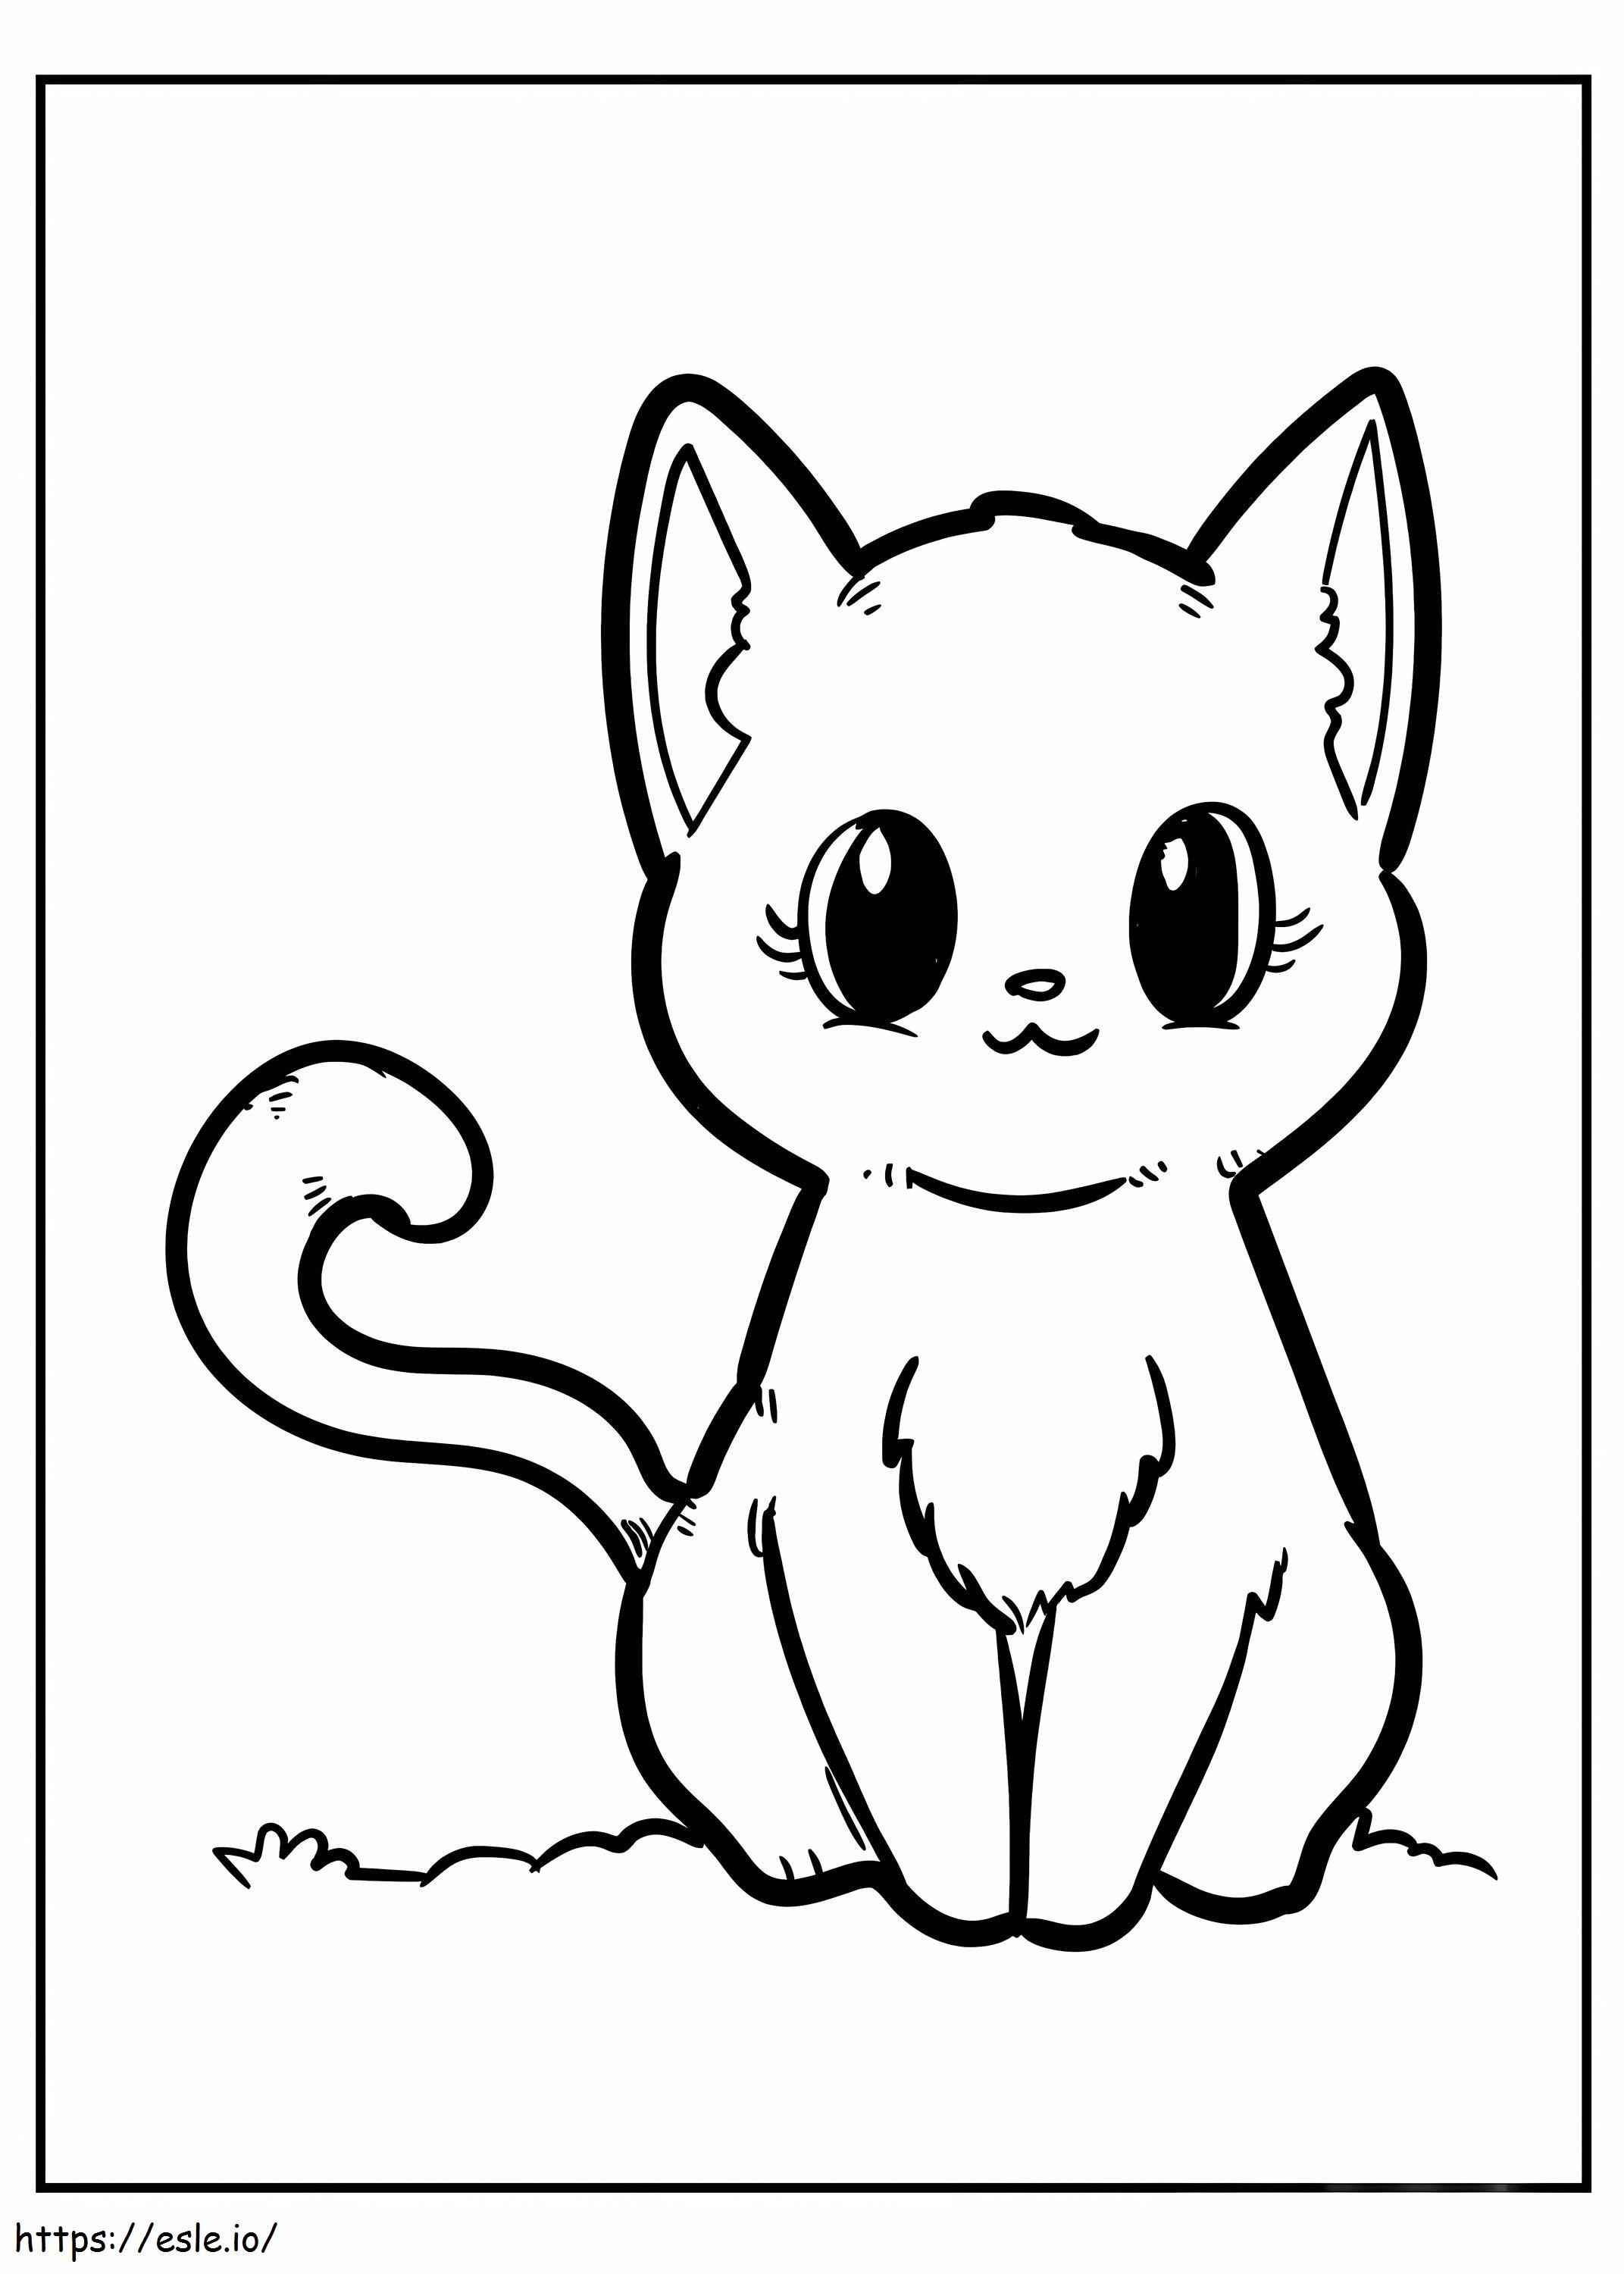 Sitting Kitten coloring page